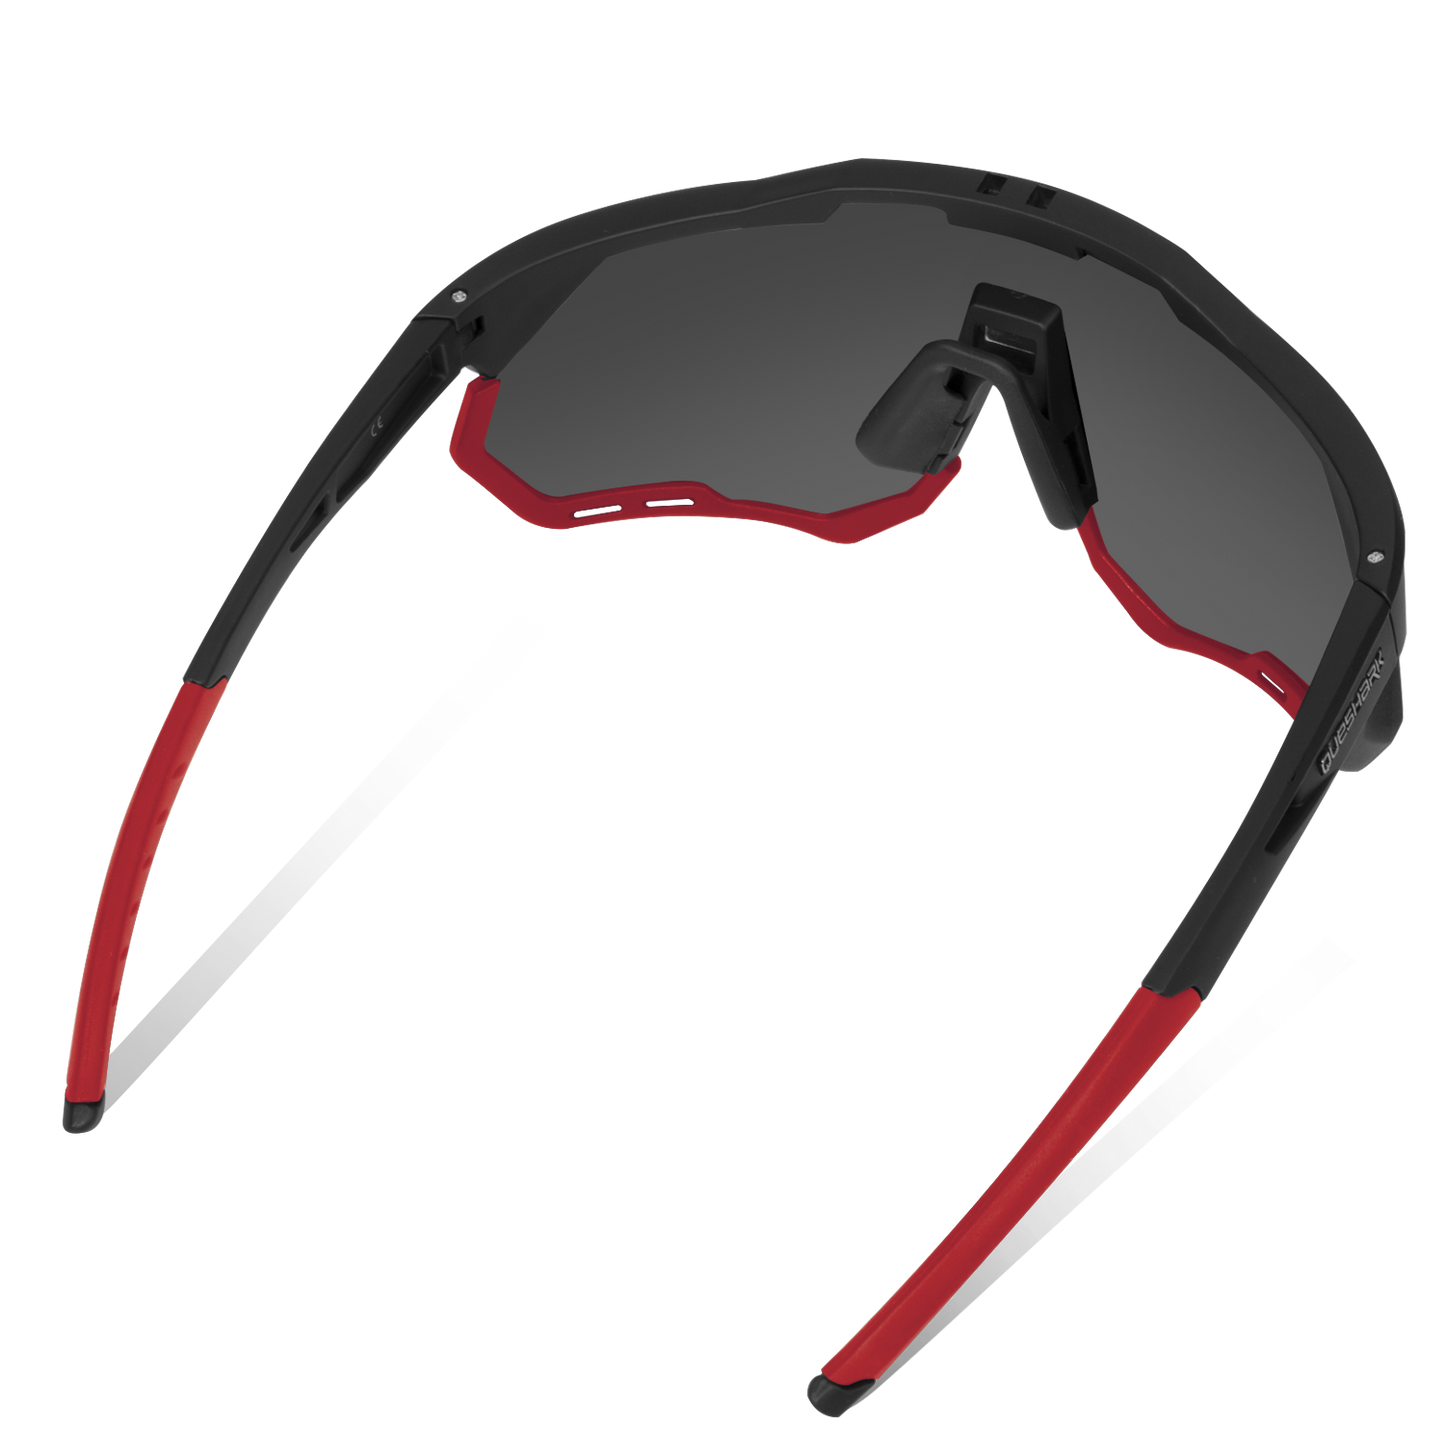 QE52 Black Red Polarized Cycling Glasses Men Women Sport Sunglasses with Replaceable Frame/Lens